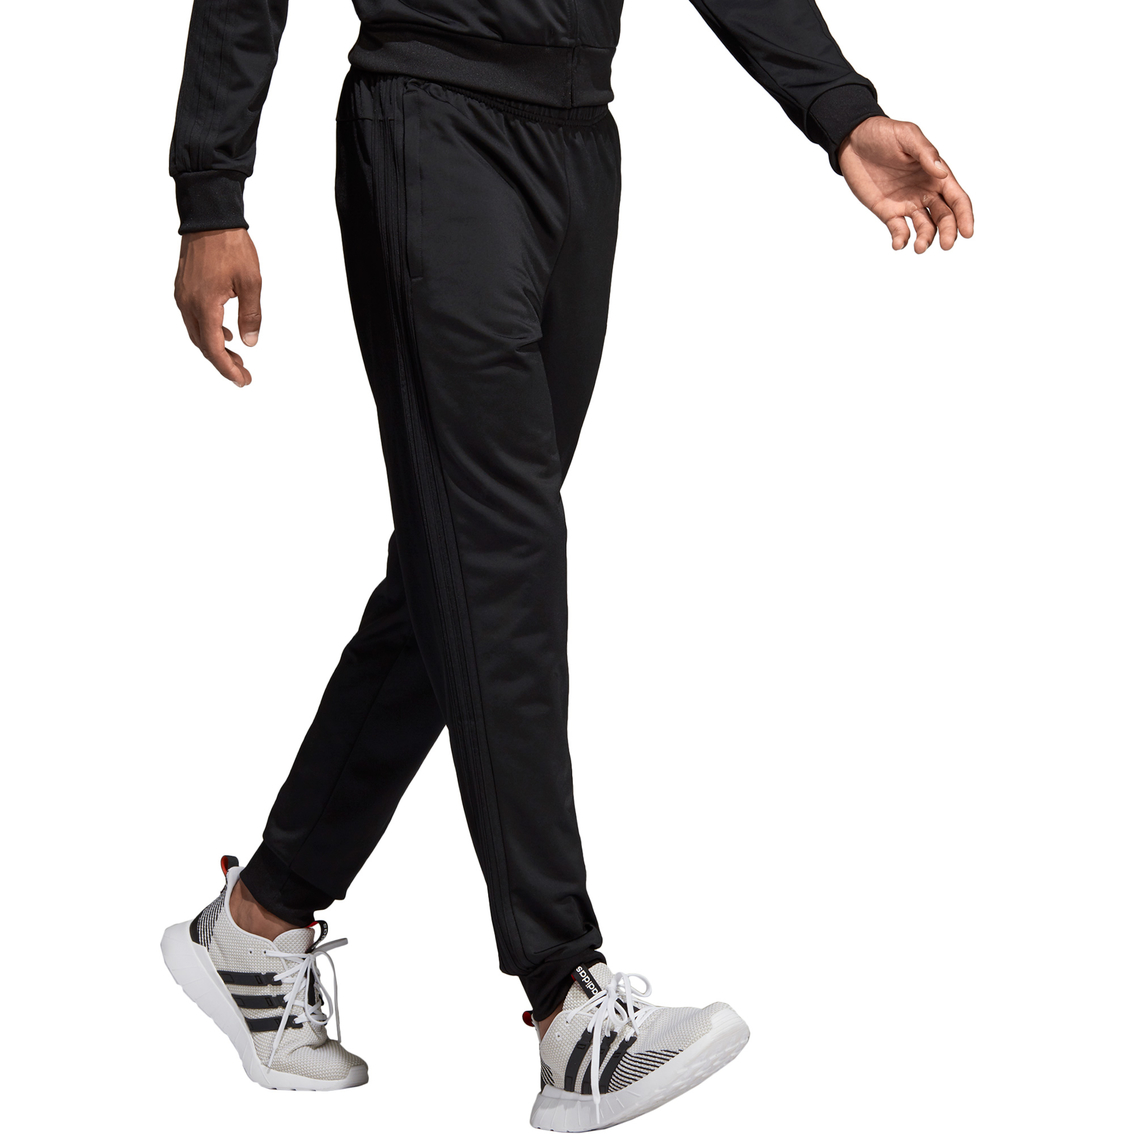 Adidas Essentials 3 Stripes Tapered Tricot Pants | Pants | Clothing ...